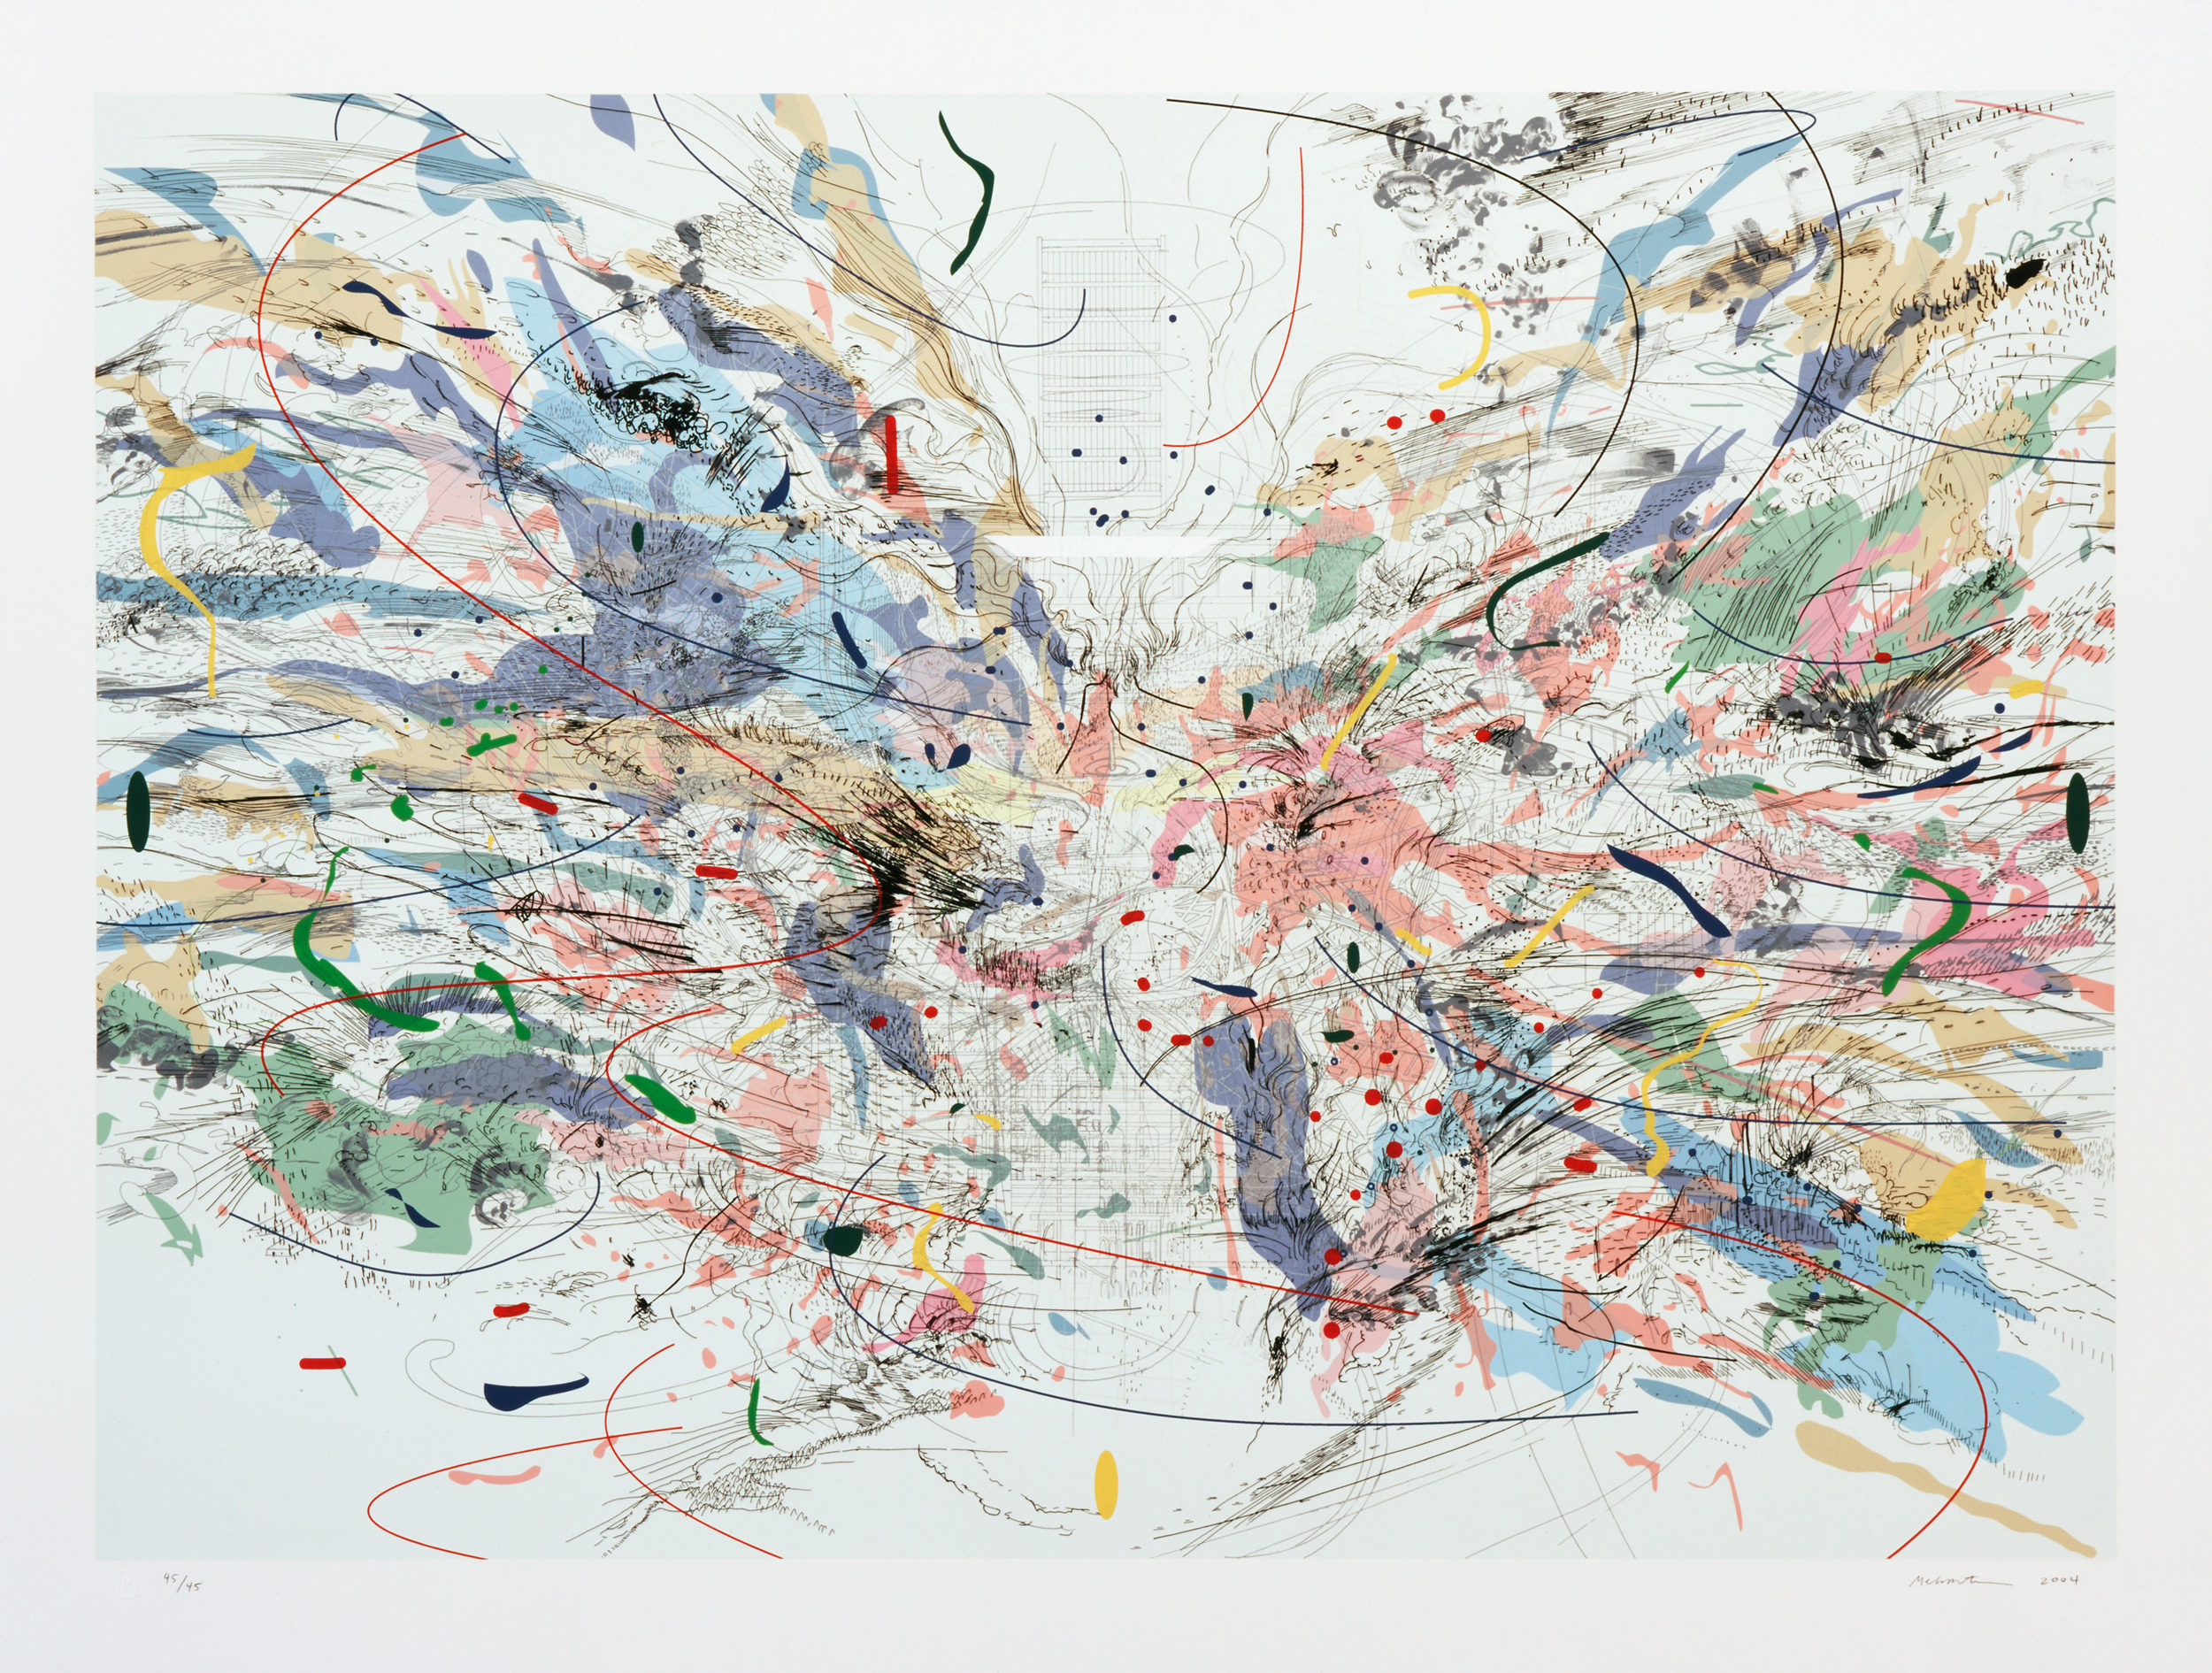    Entropia (review)   by Julie Mehretu 2004  Edition of 45 | 32-color lithograph and screenprint on Arches 88 paper | image: 29" x 40" | paper: 33 1/2" x 44" | Co-published by Highpoint Editions and the Walker Art Center 